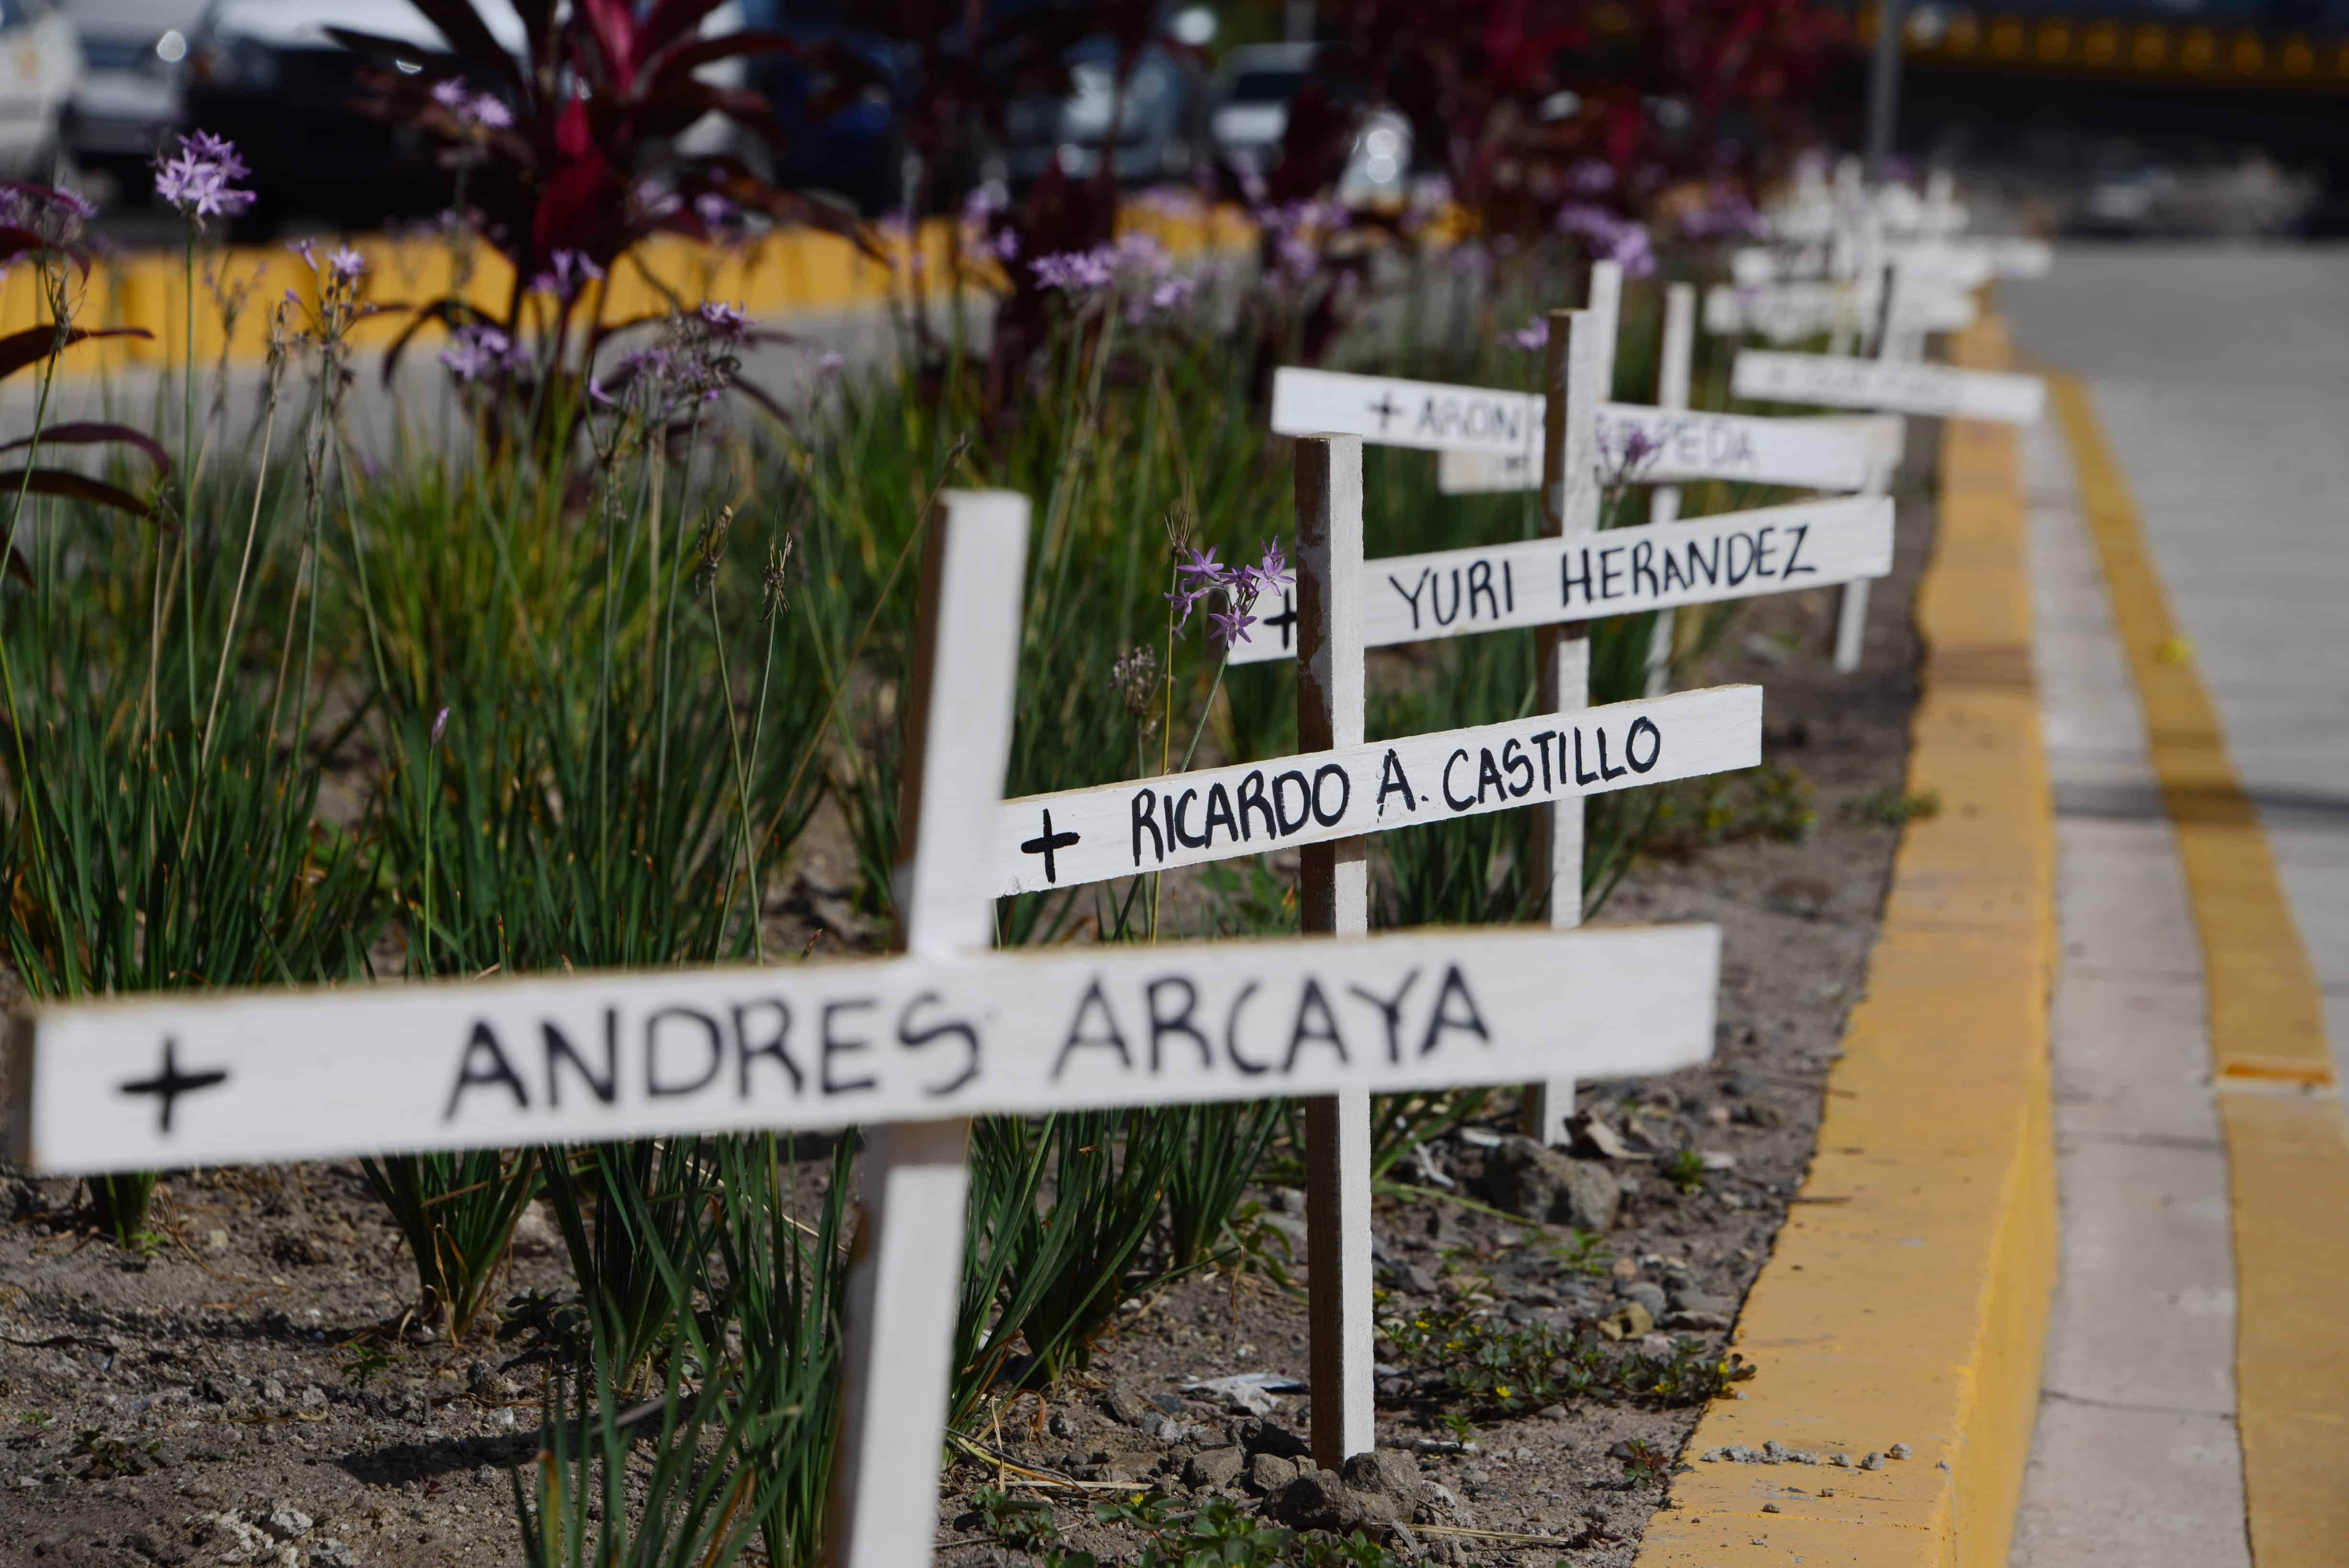 White crosses in memory of victims of violence are seen around Tegucigalpa.